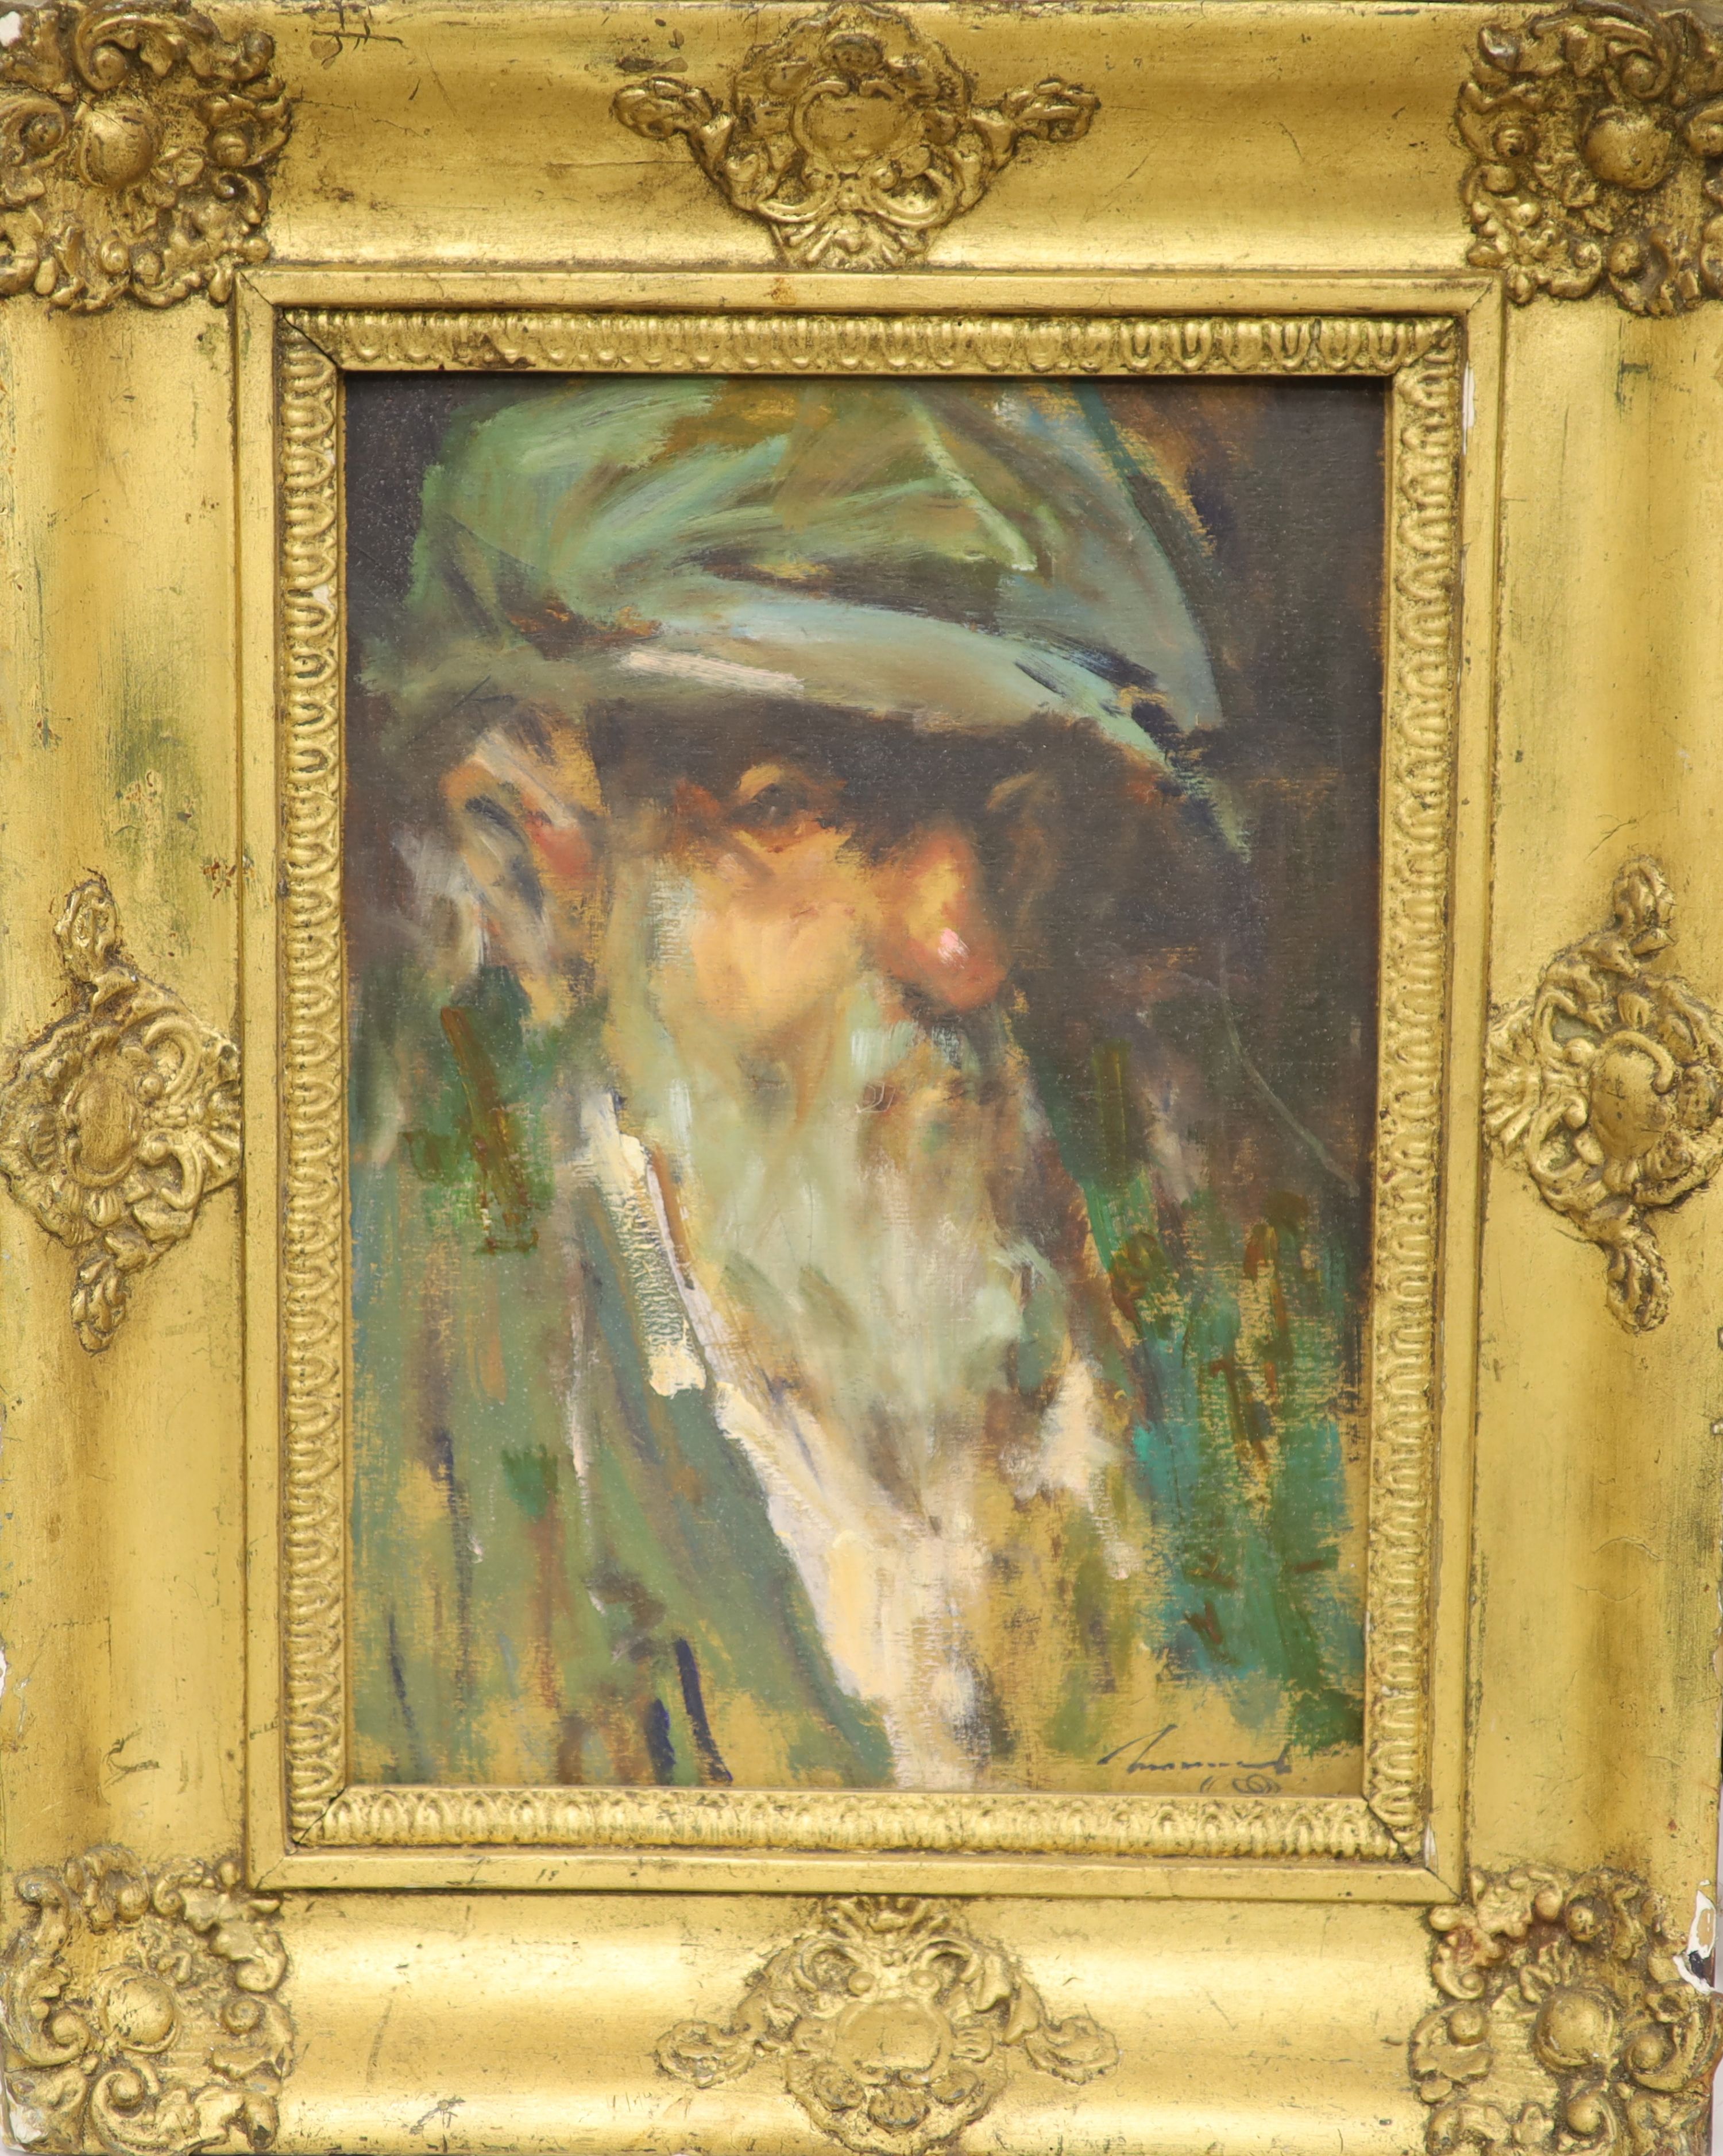 Ken Moroney (1949-), oil on card, Portrait of a bearded man, signed, 28 x 20cm signed, 11 x 8 ins.